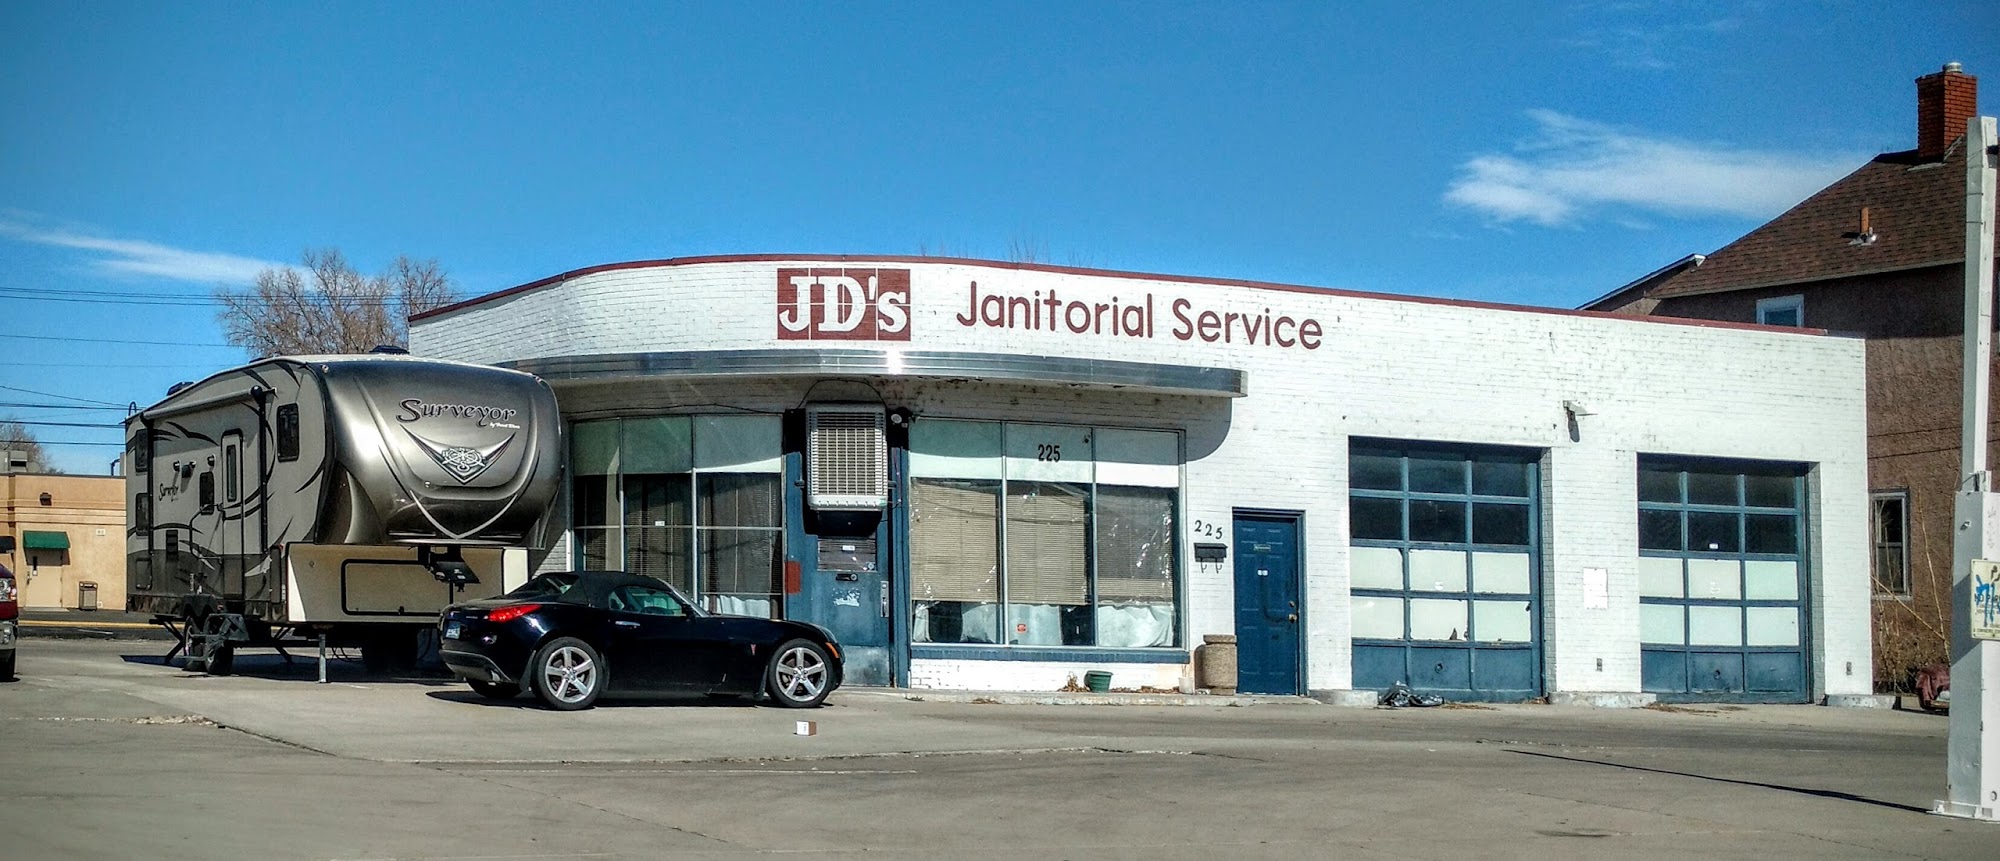 JD's Janitorial Service